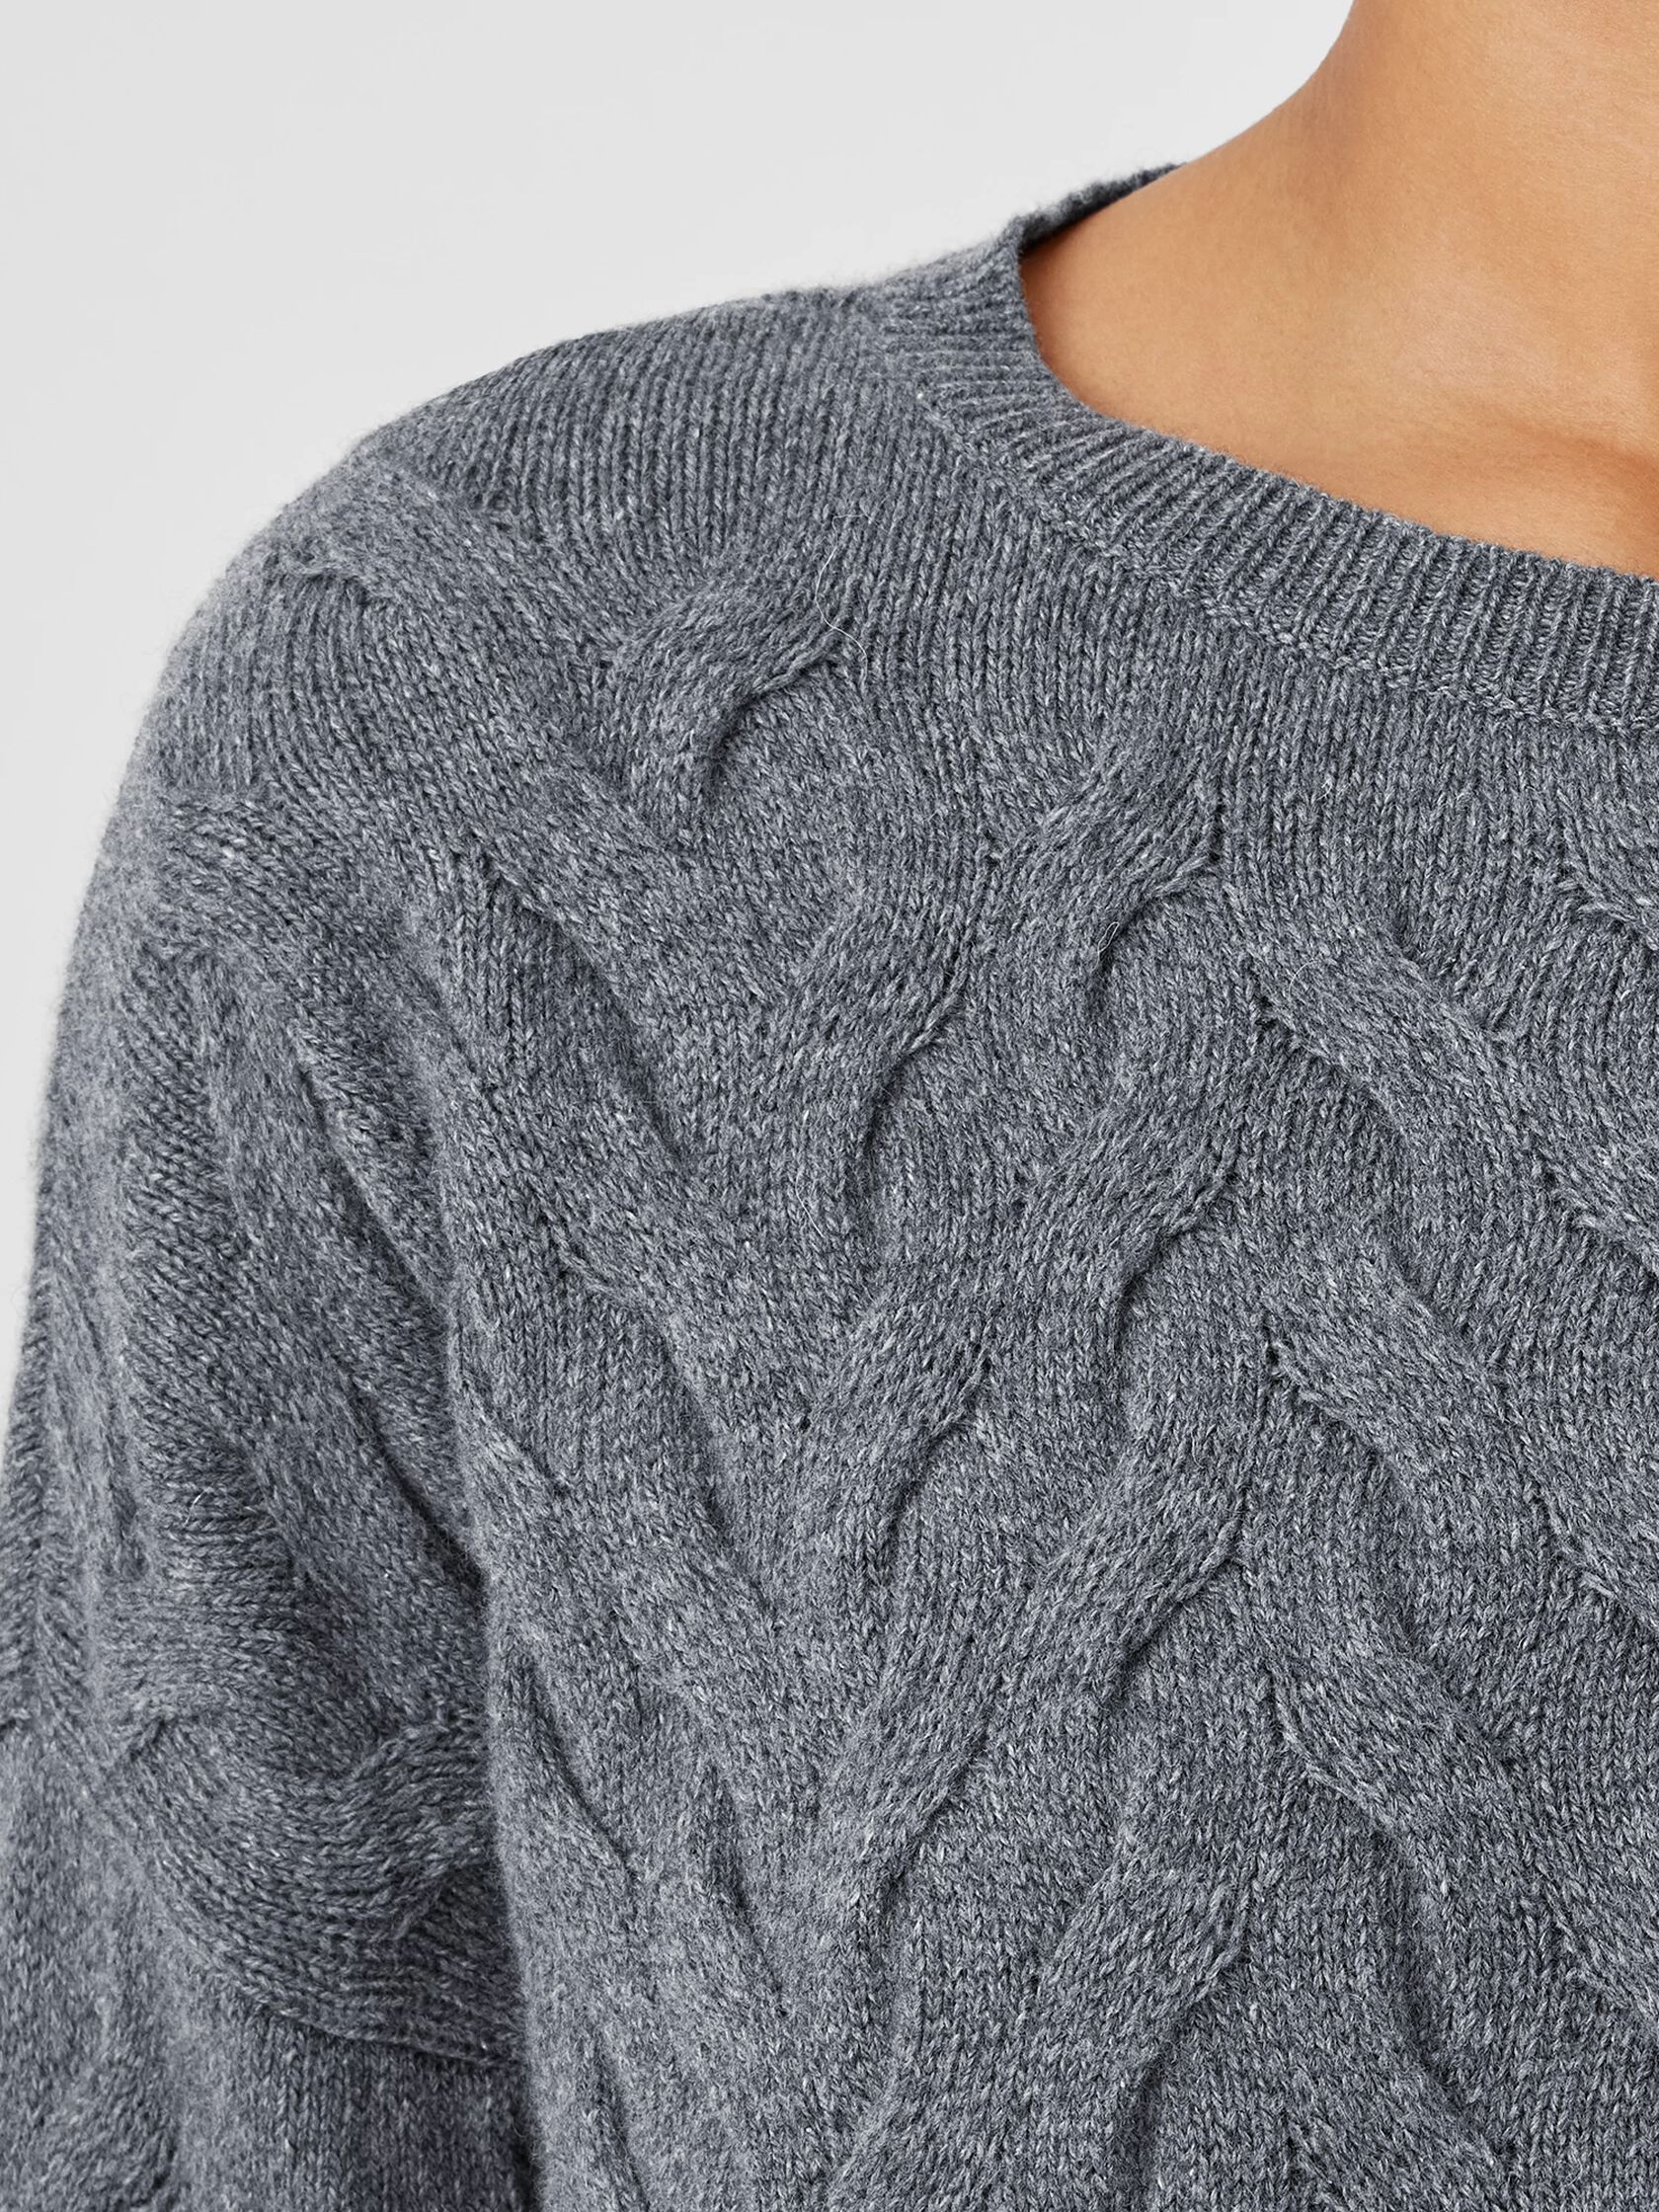 Cotton and Recycled Cashmere Crew Neck Top